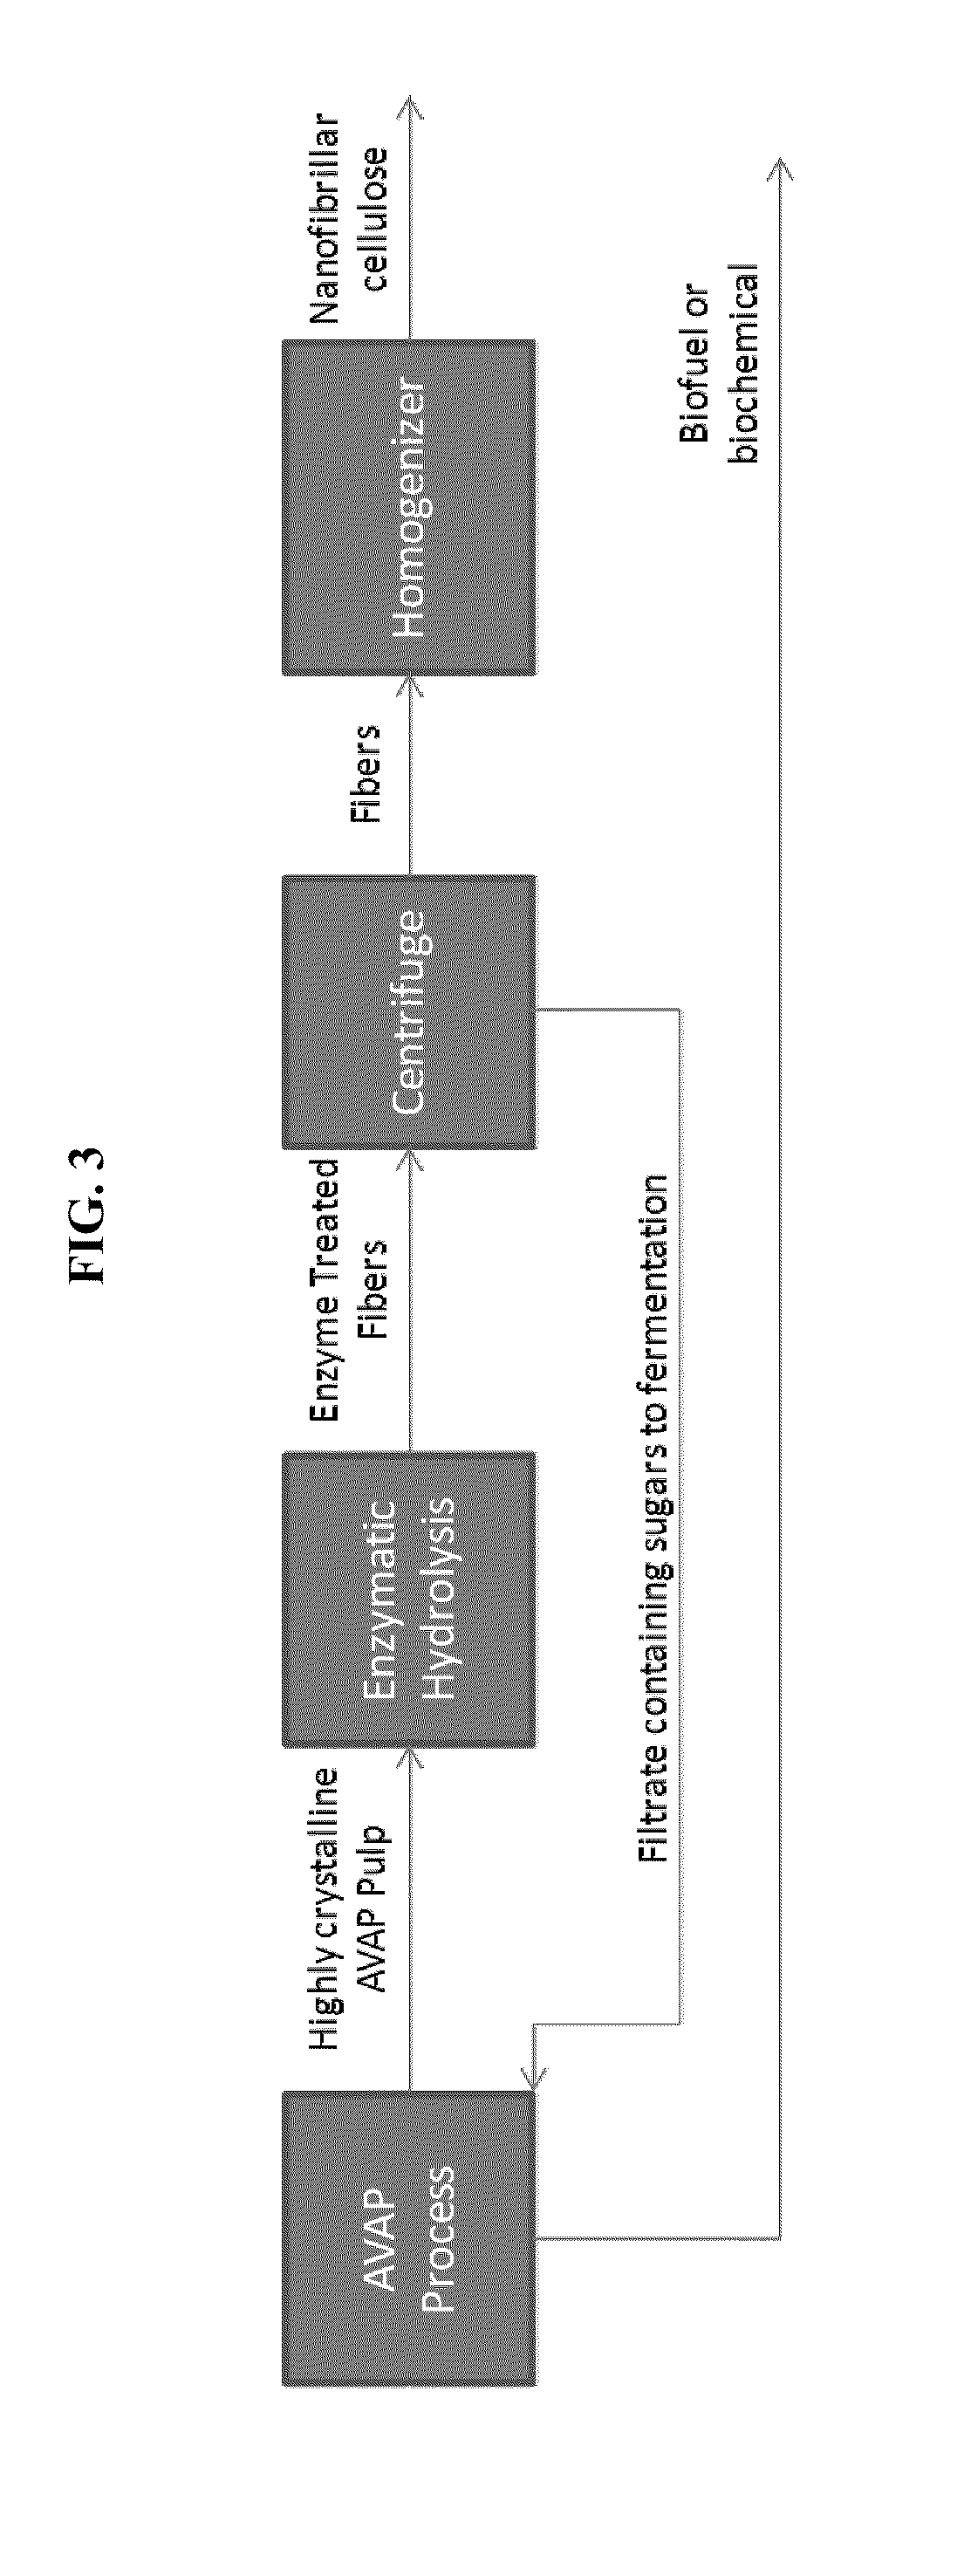 Processes and apparatus for producing nanocellulose, and compositions and products produced therefrom